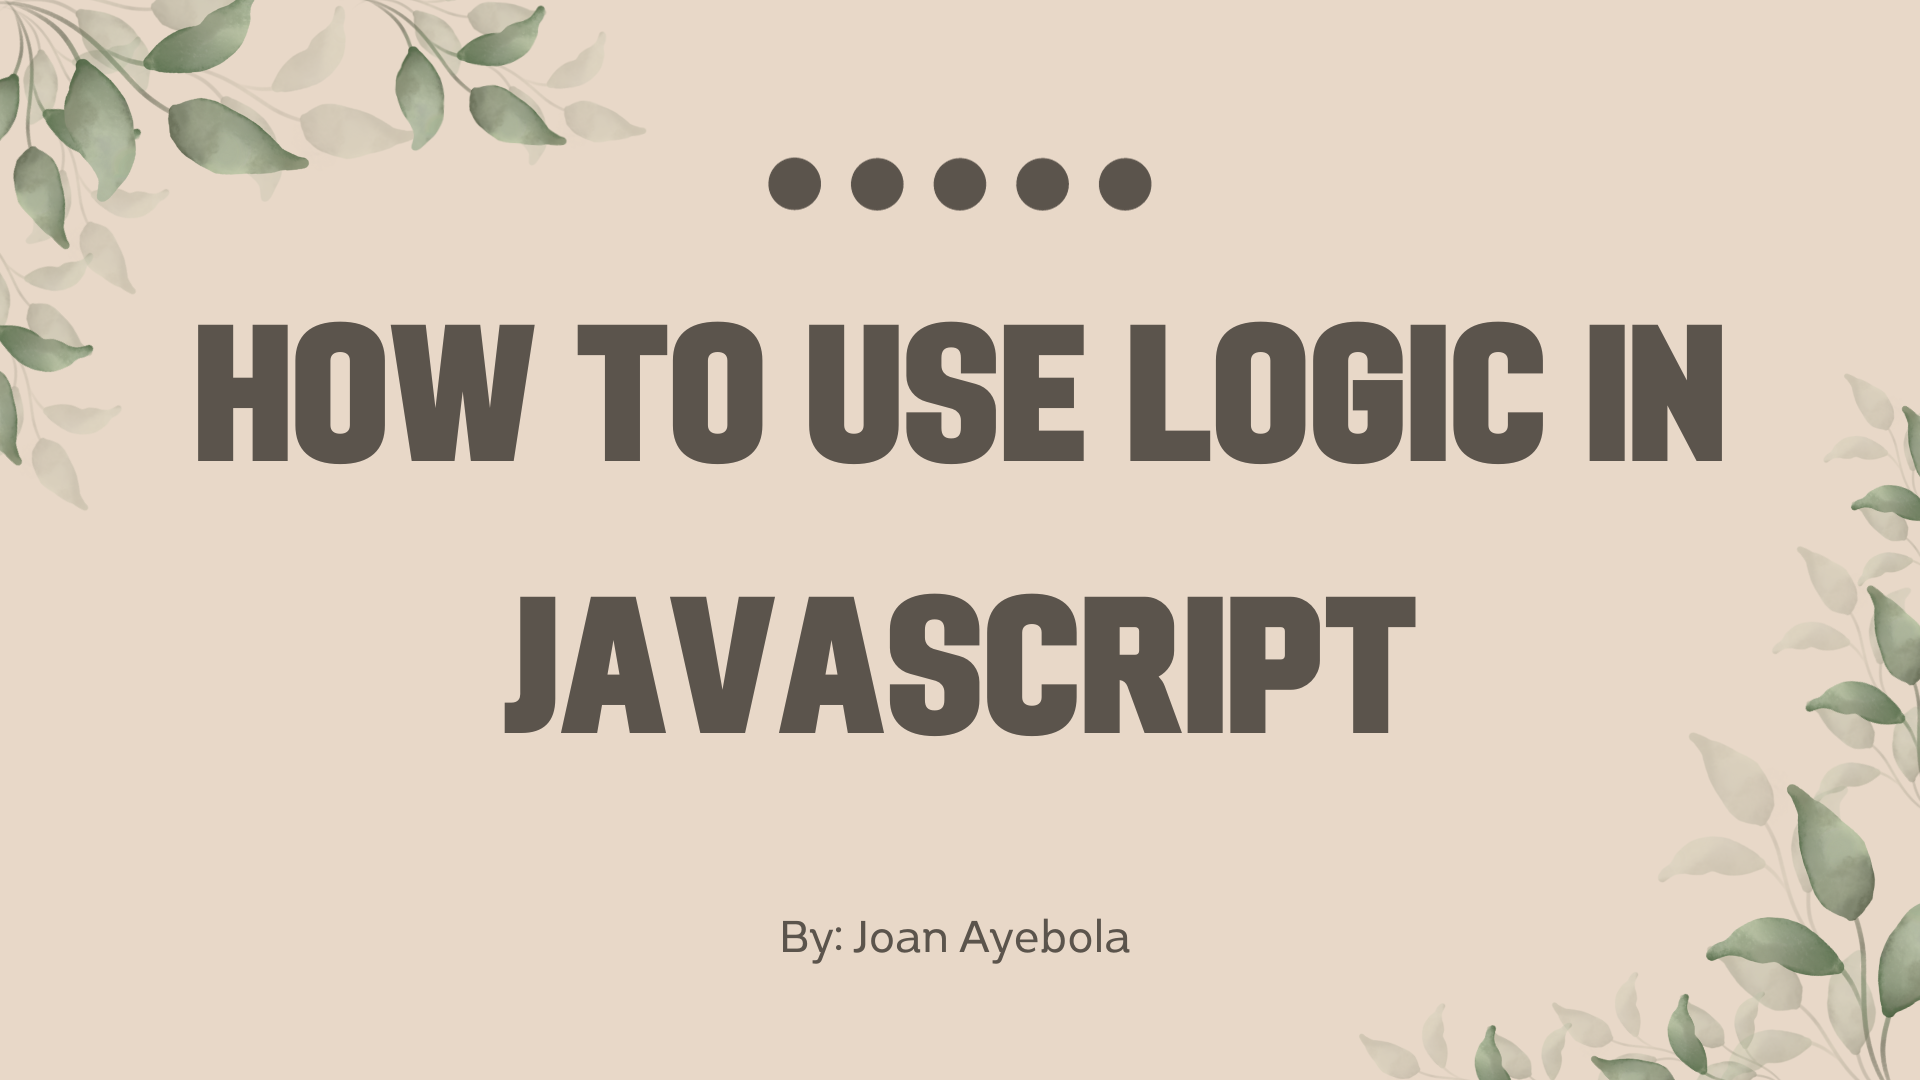 How to Use Logic in JavaScript – Operators, Conditions, Truthy/Falsy, and More